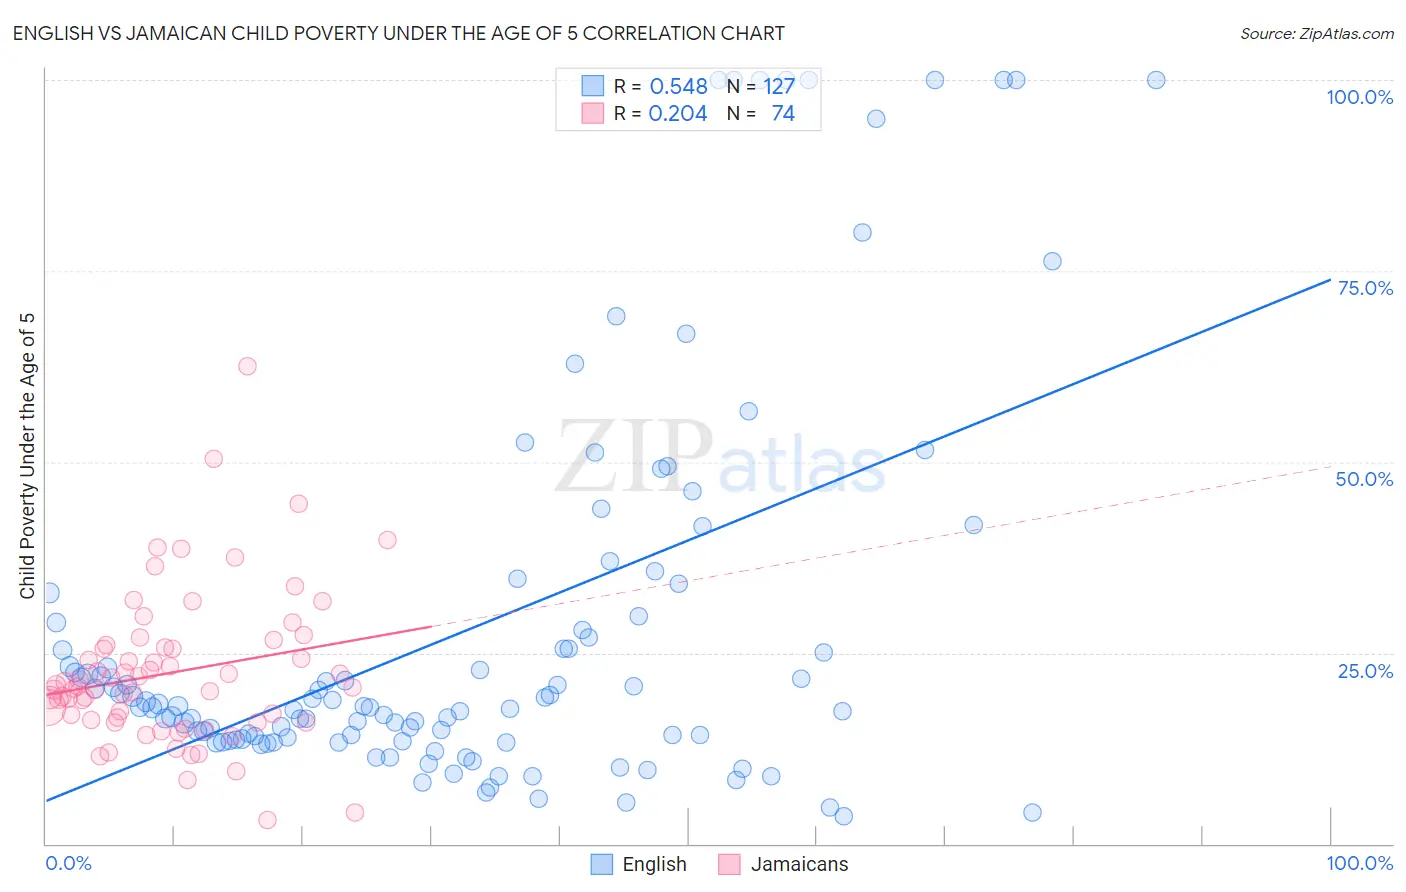 English vs Jamaican Child Poverty Under the Age of 5